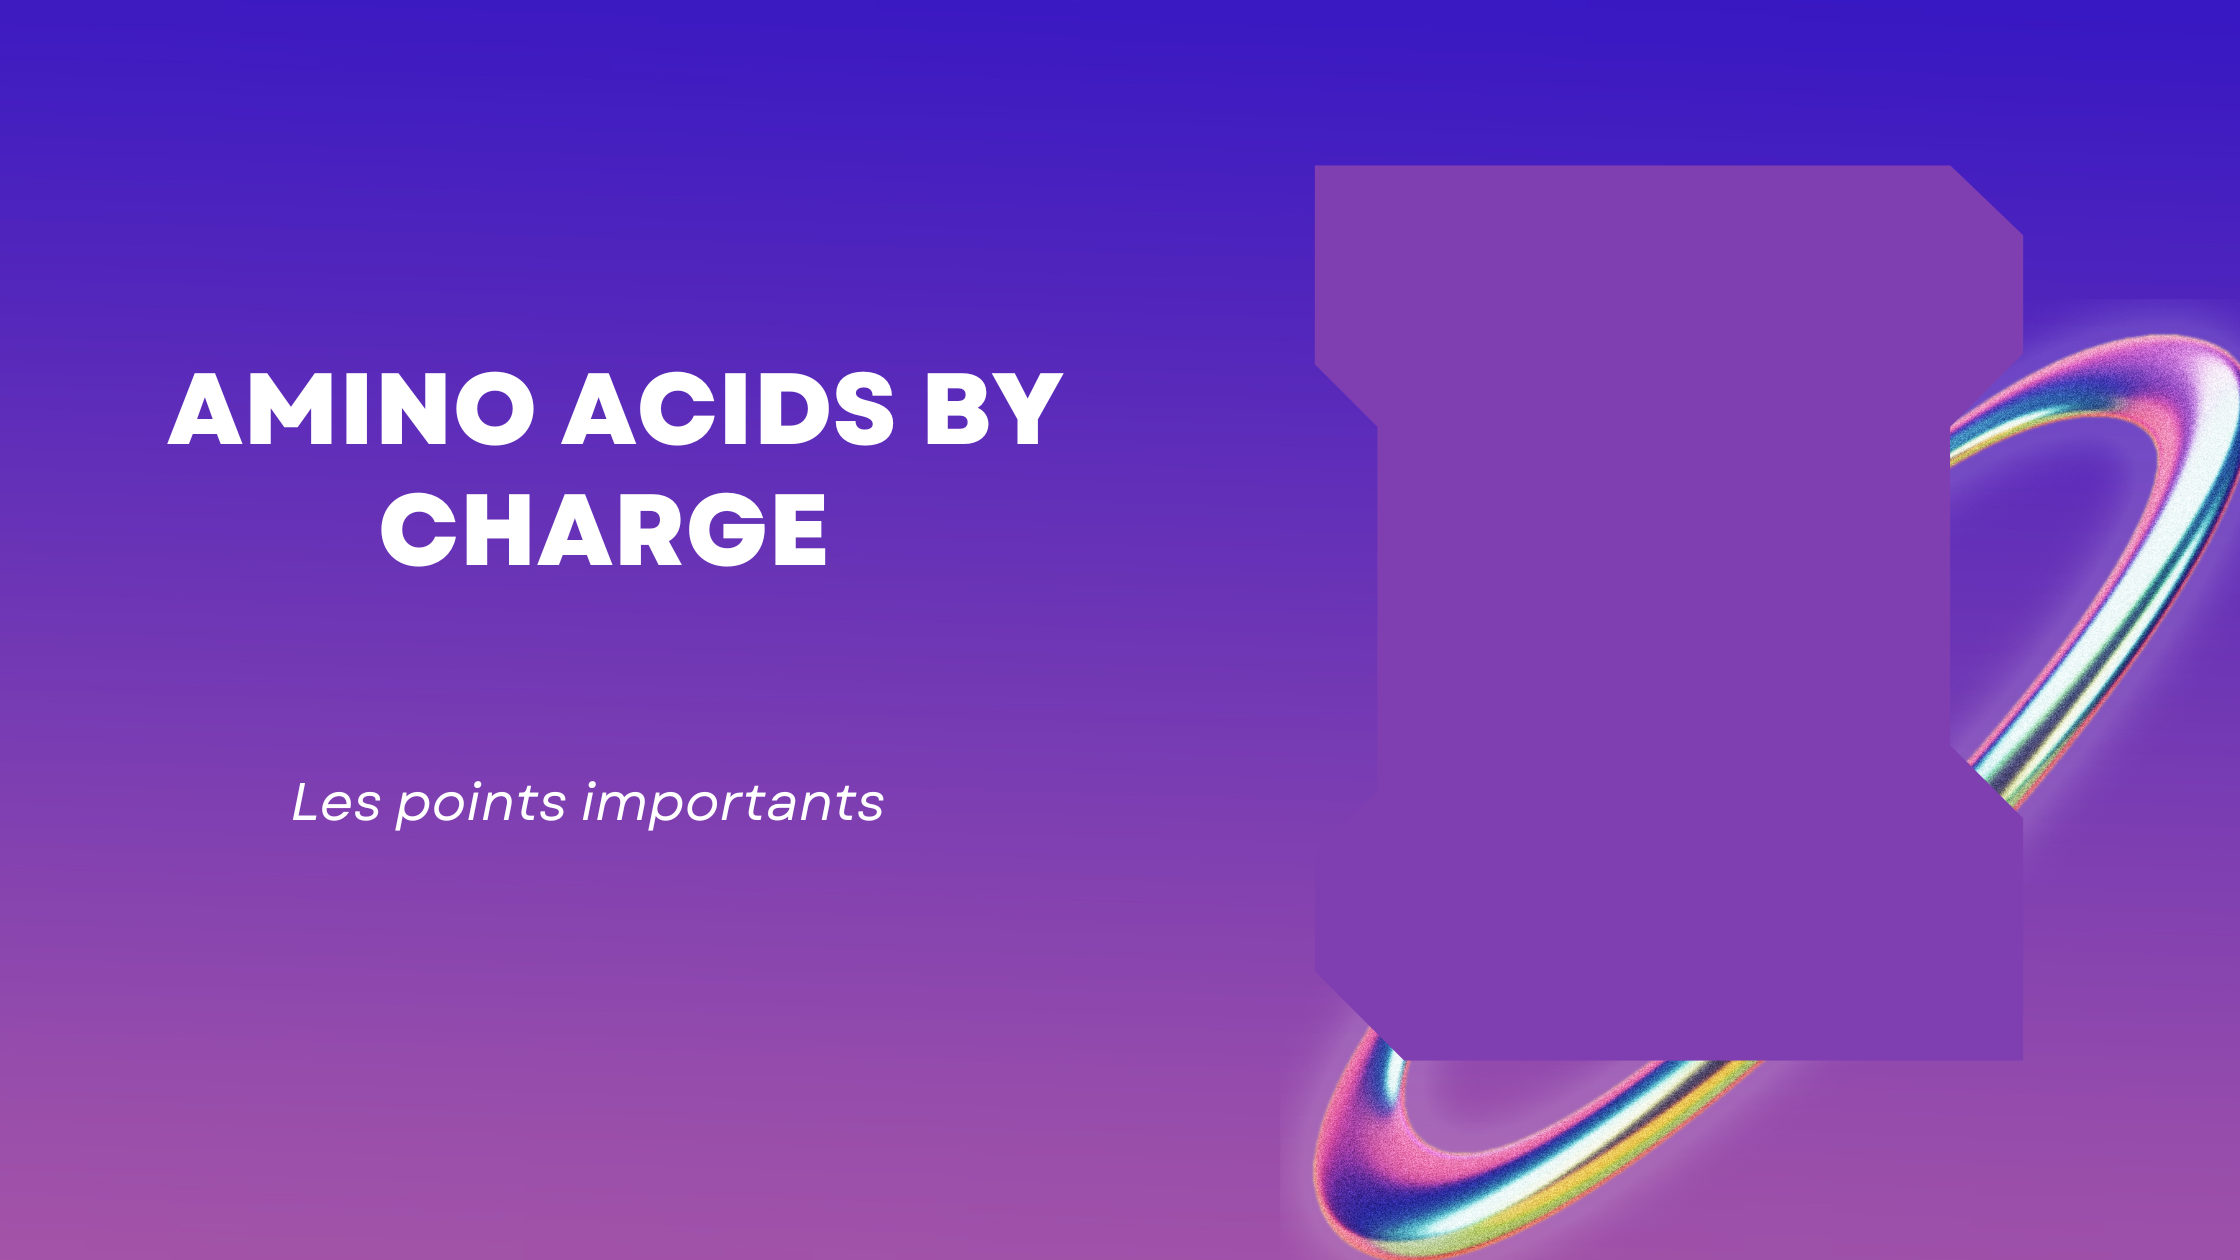 amino acids by charge | Les points importants